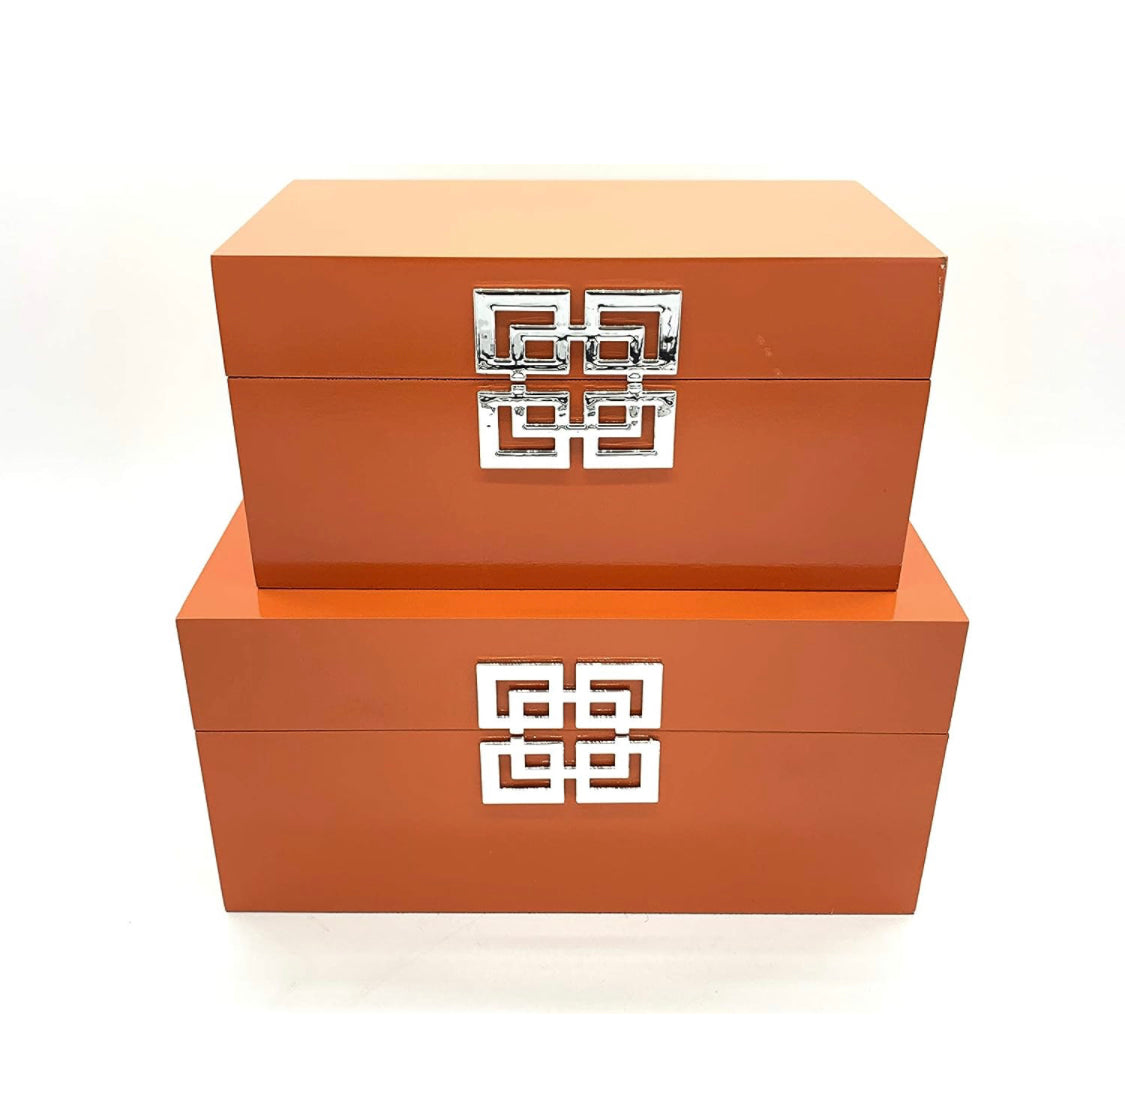 Galt International Large & Small Decorative Storage Box w/Hinged Lid - Classic Design Wood Decor Boxes with Geometric Opening Clasp - Home & Office Storage - Set of 2